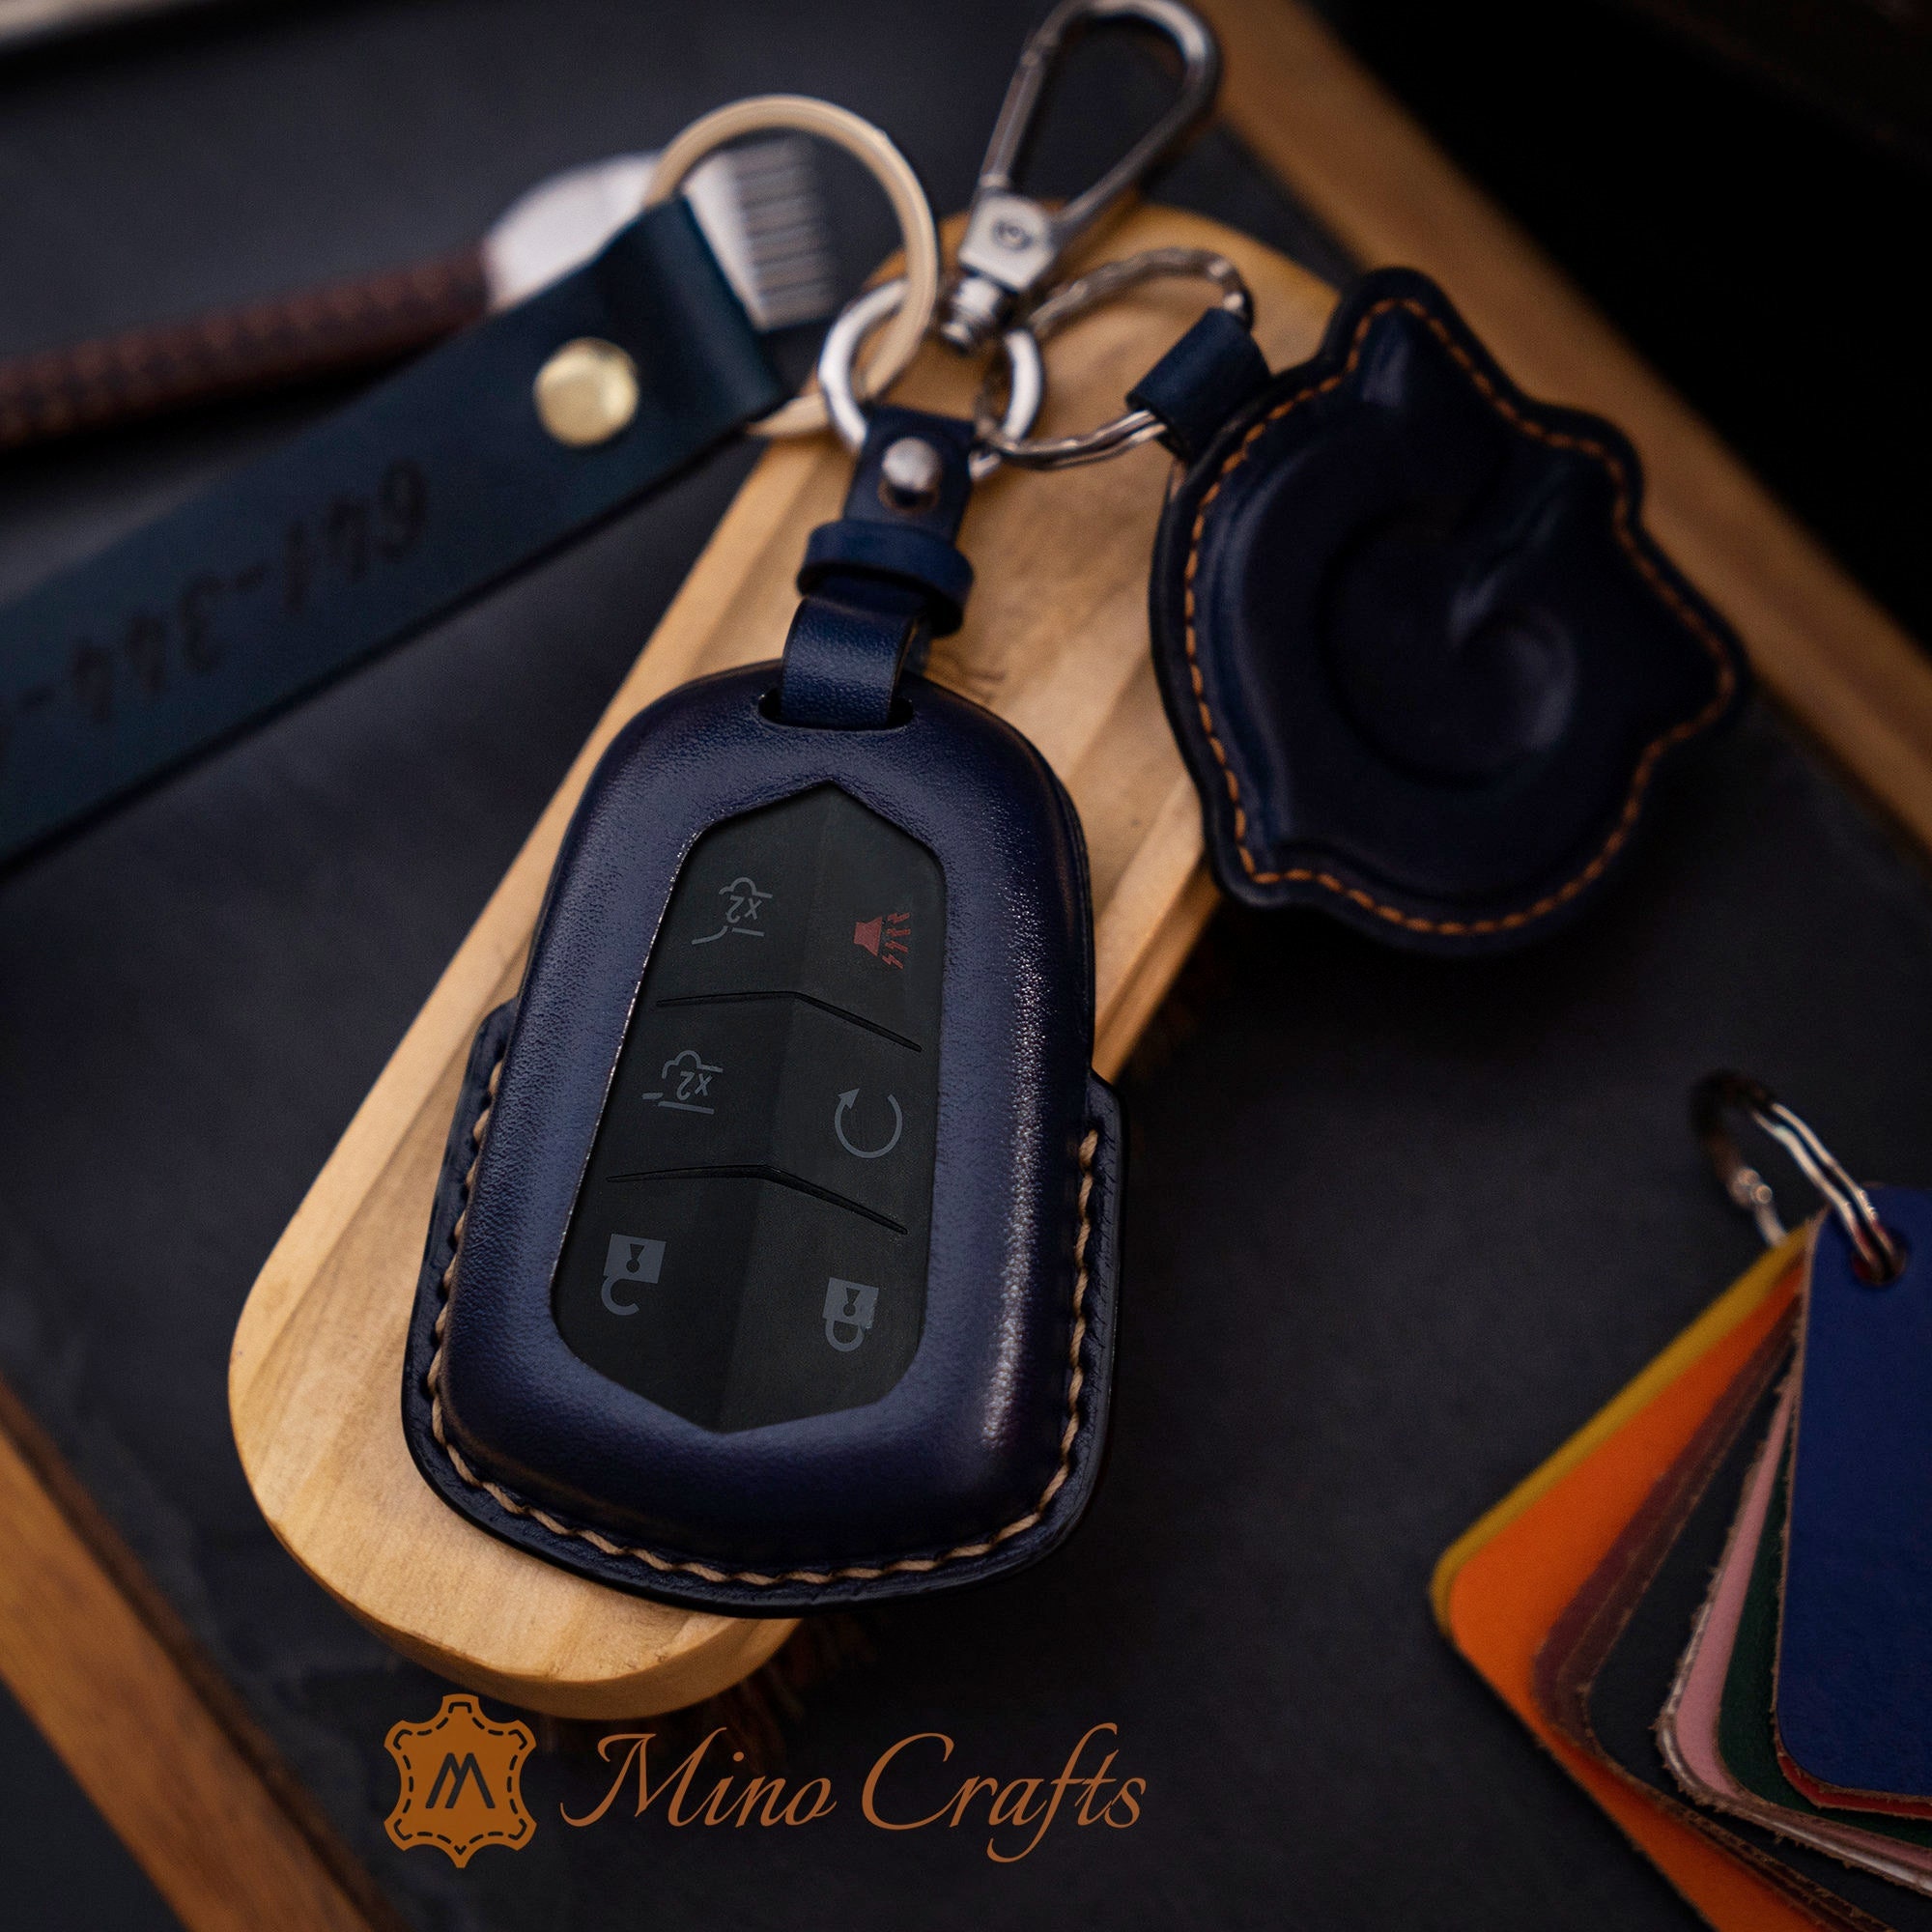 New Fashion TPU Car Key Case Cover For Cadillac SRX 2015 2016 ATS CTS CT6  XT5 XTS Smart Remote Fob Cover Protector Bag Keychain